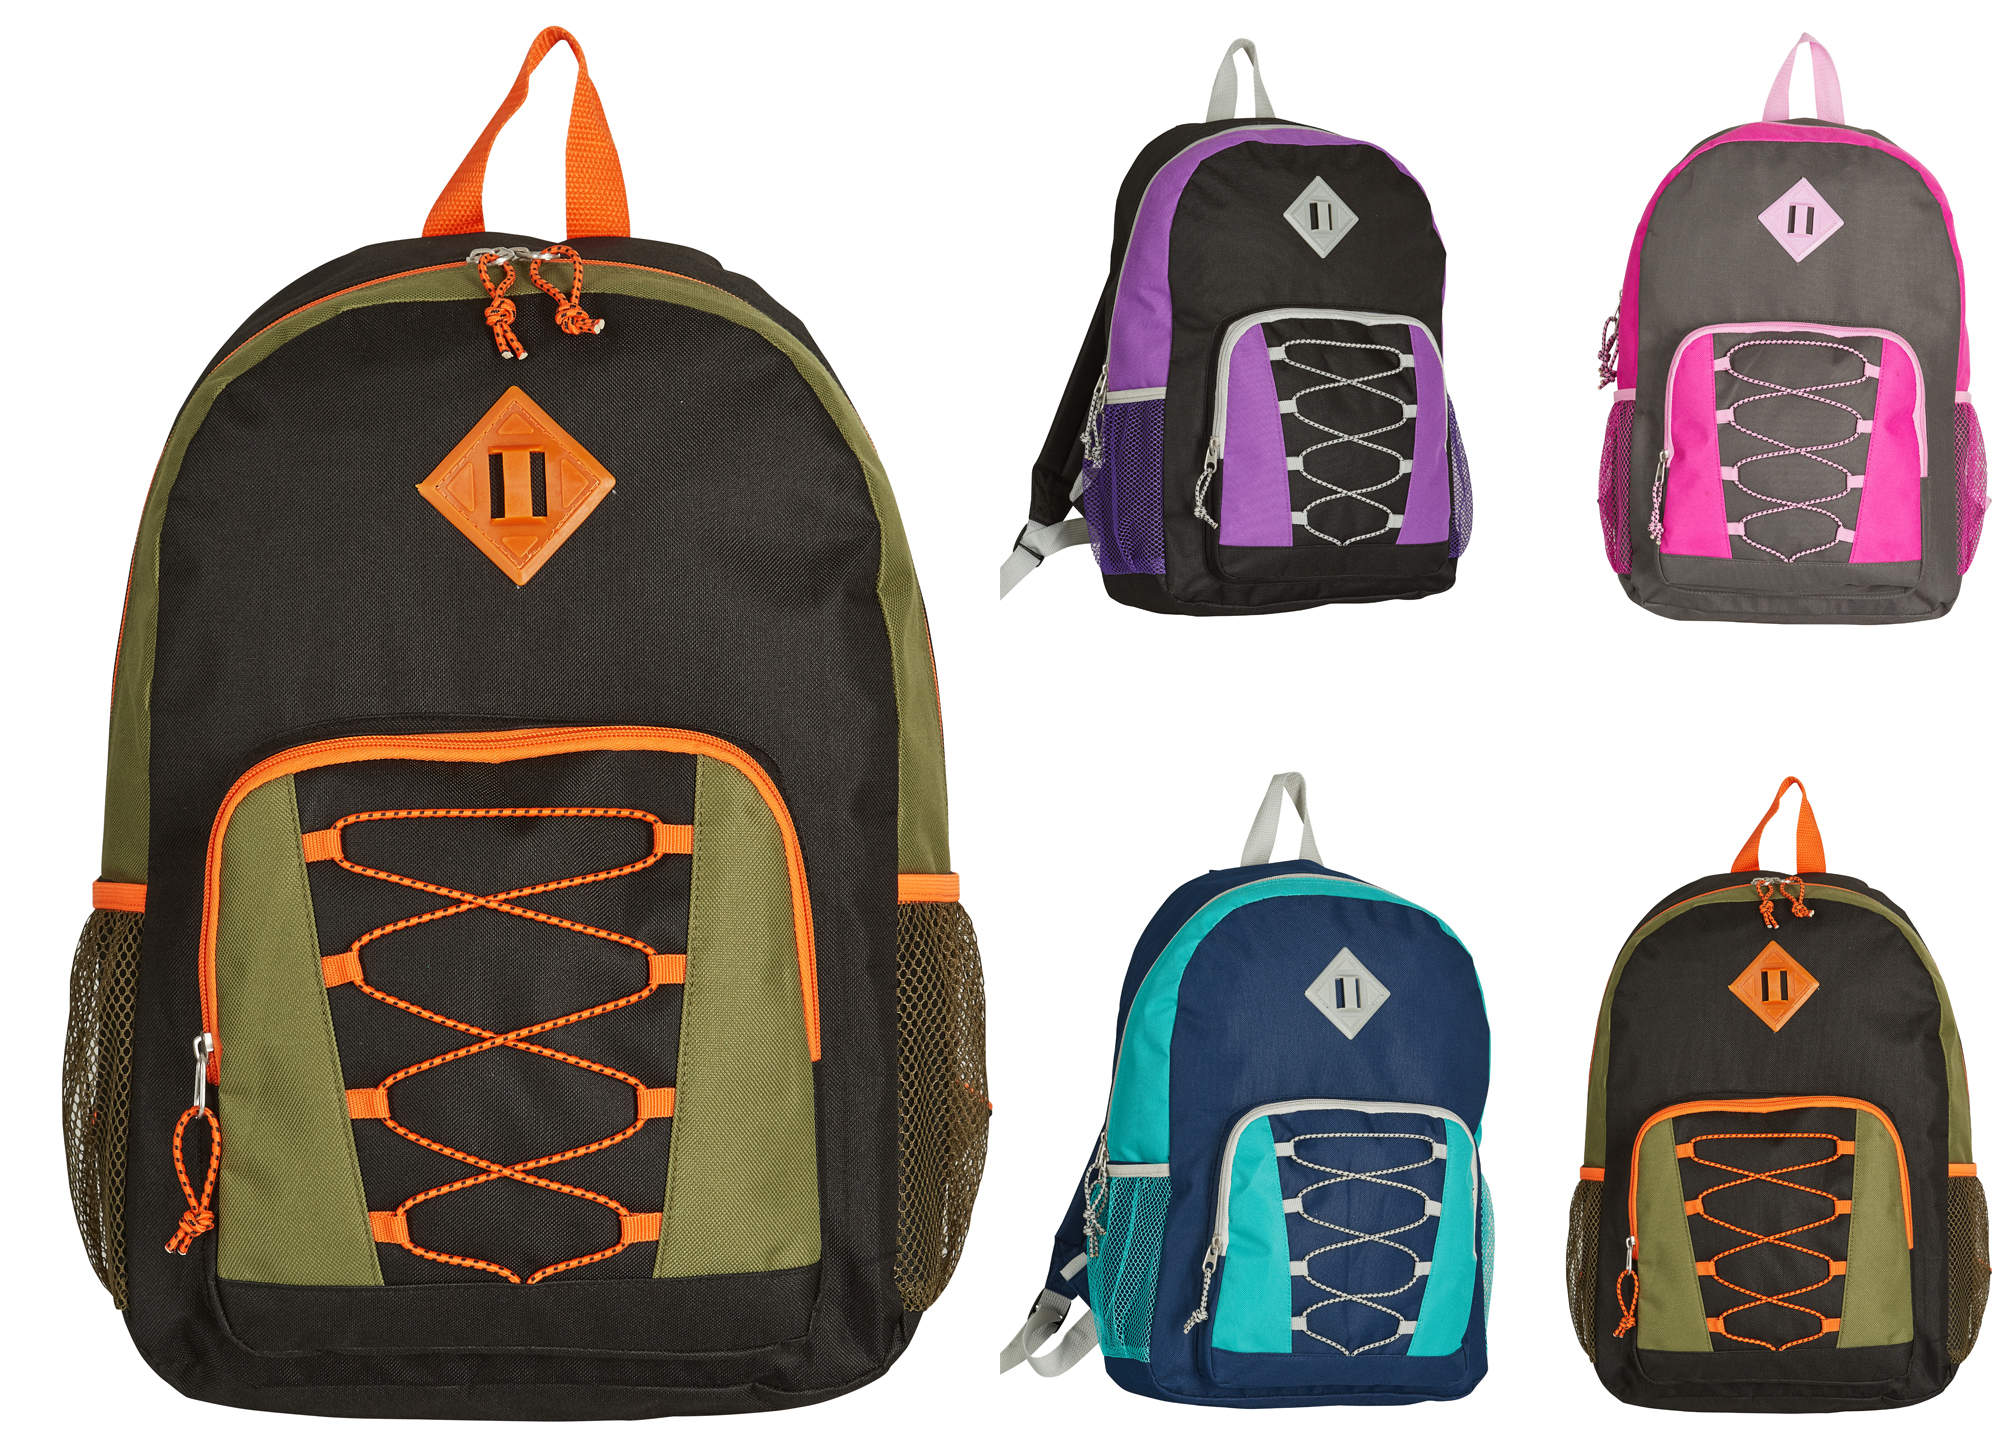 ''17'''' Bungee BACKPACKs w/ Side Mesh Pockets - Choose Your Color(s)''